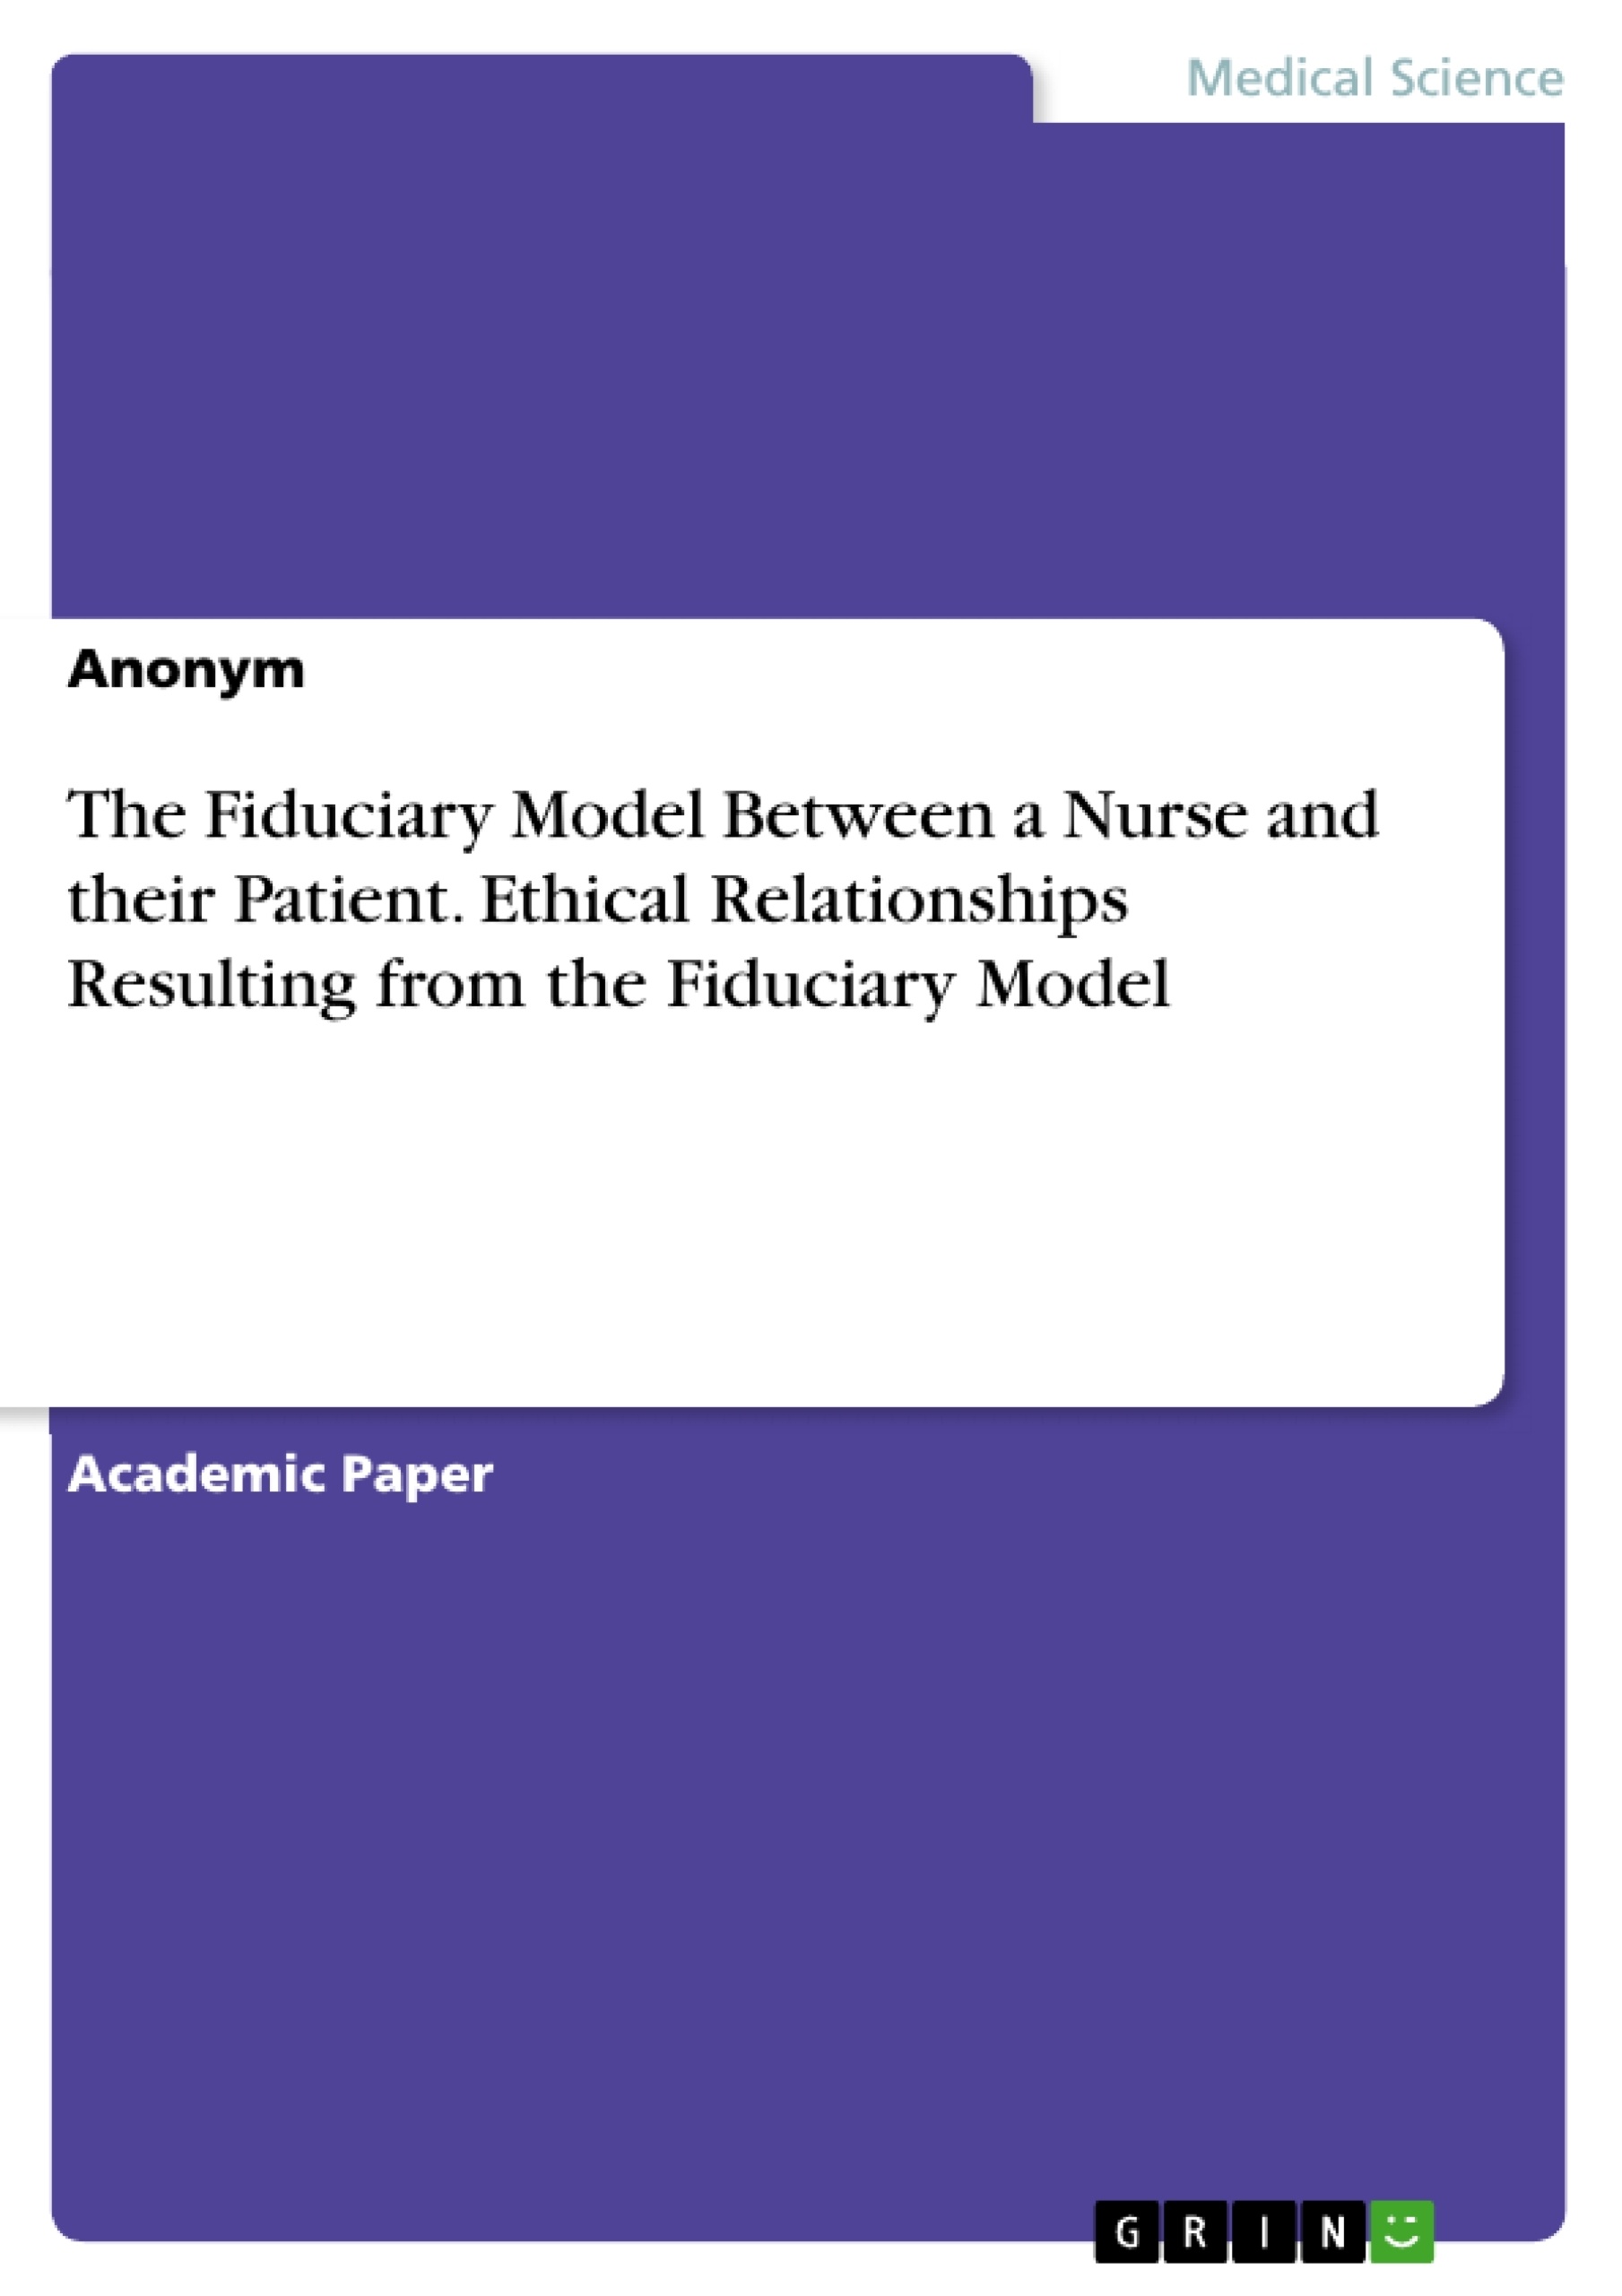 Titre: The Fiduciary Model Between a Nurse and their Patient. Ethical Relationships Resulting from the Fiduciary Model